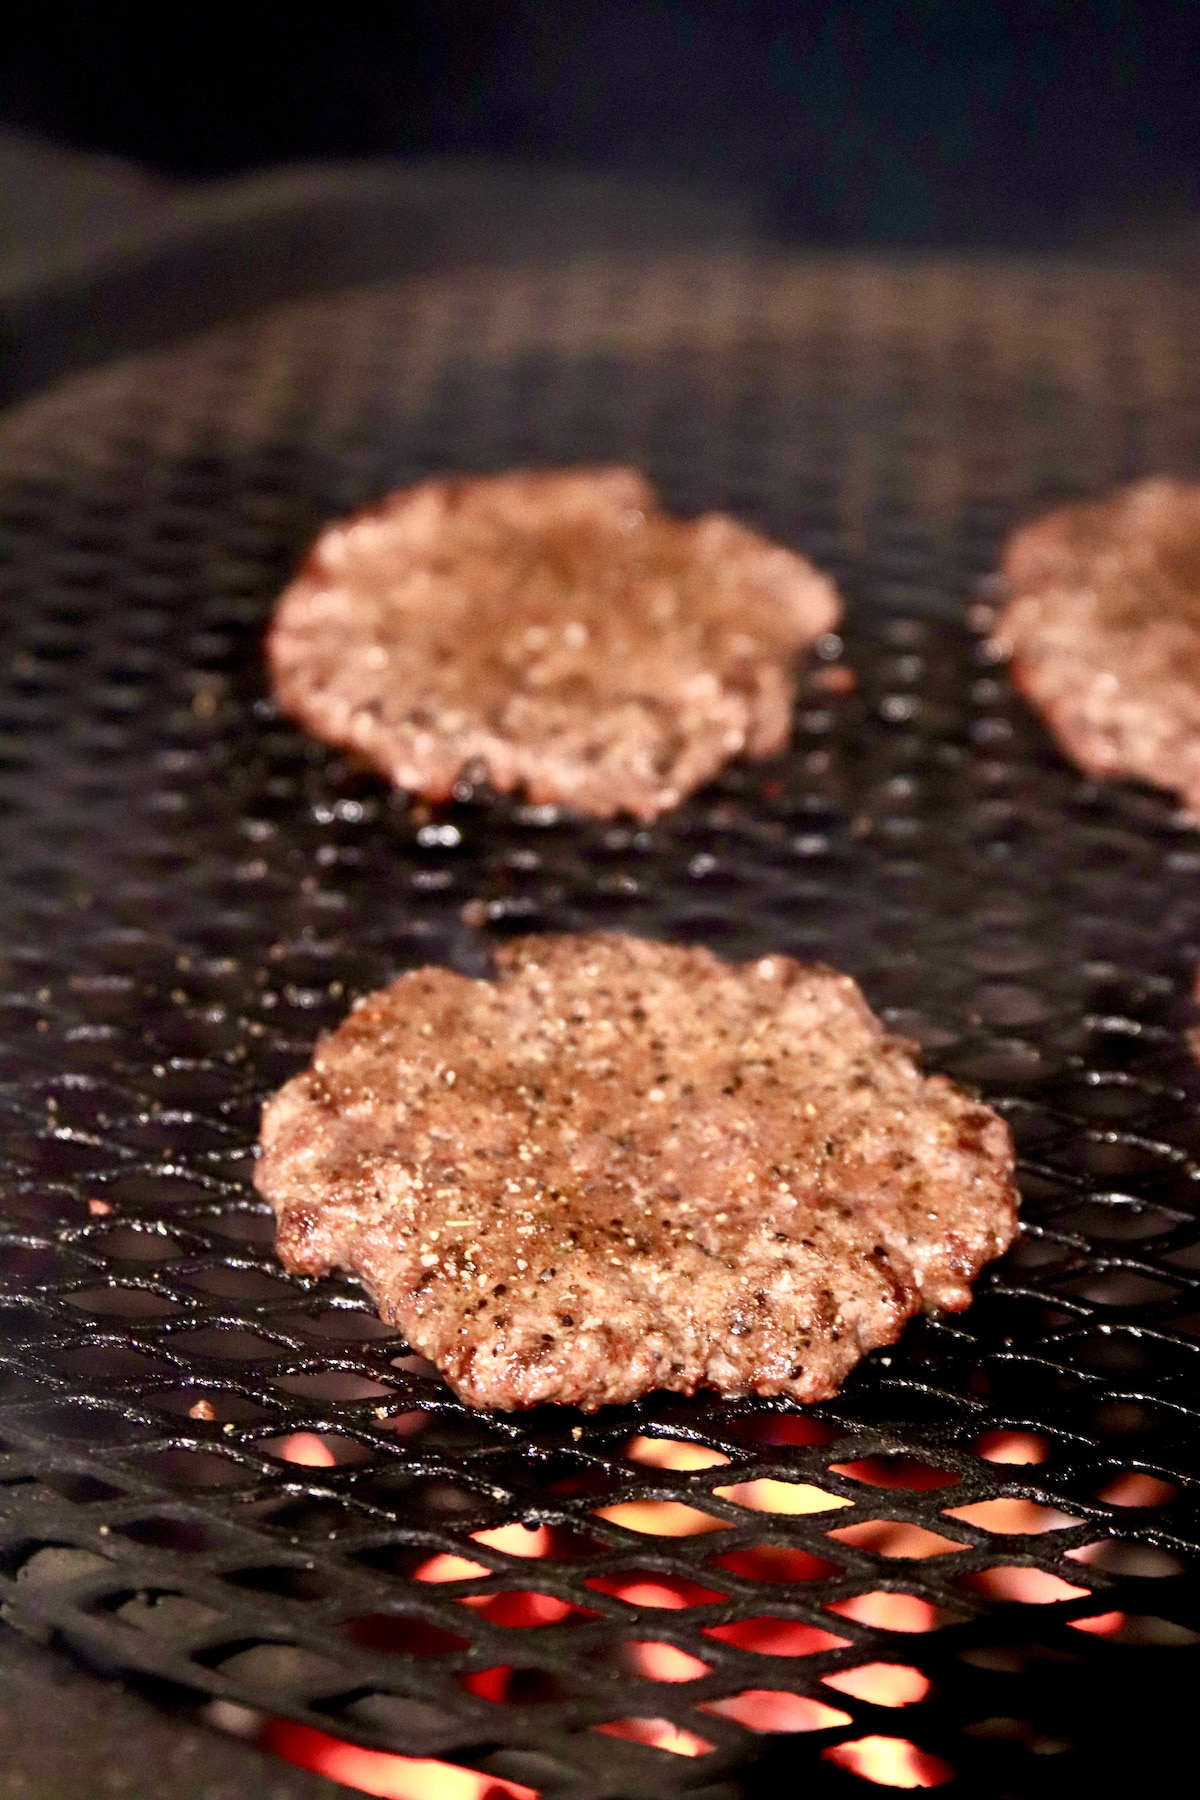 Grilling burgers with over flames.